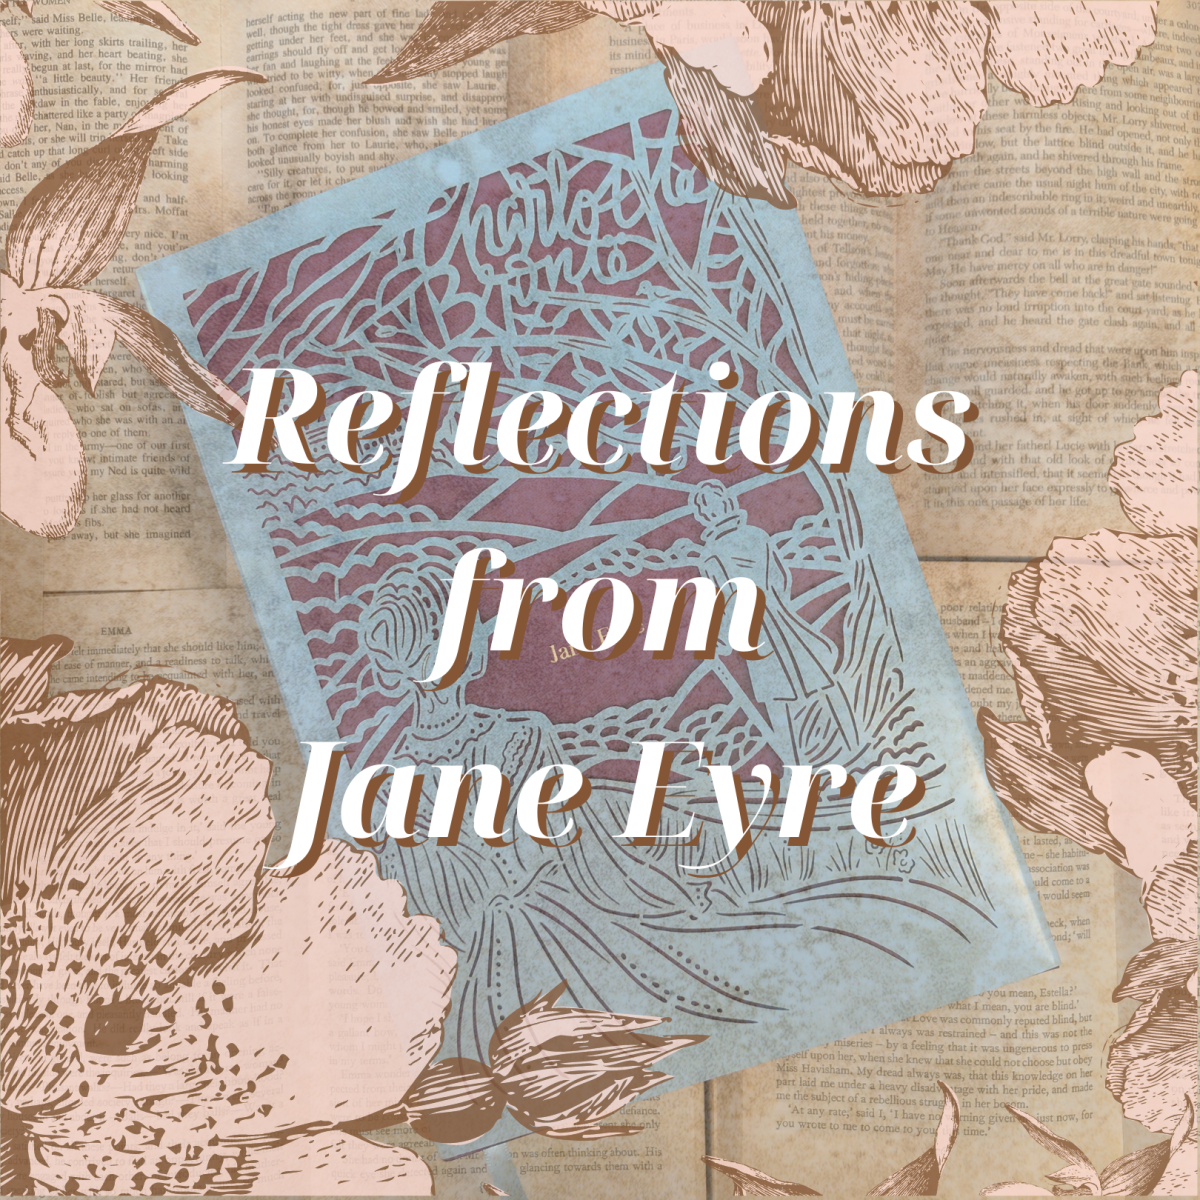 A Christian’s Reflections on Charlotte Brontë’s ‘Jane Eyre’